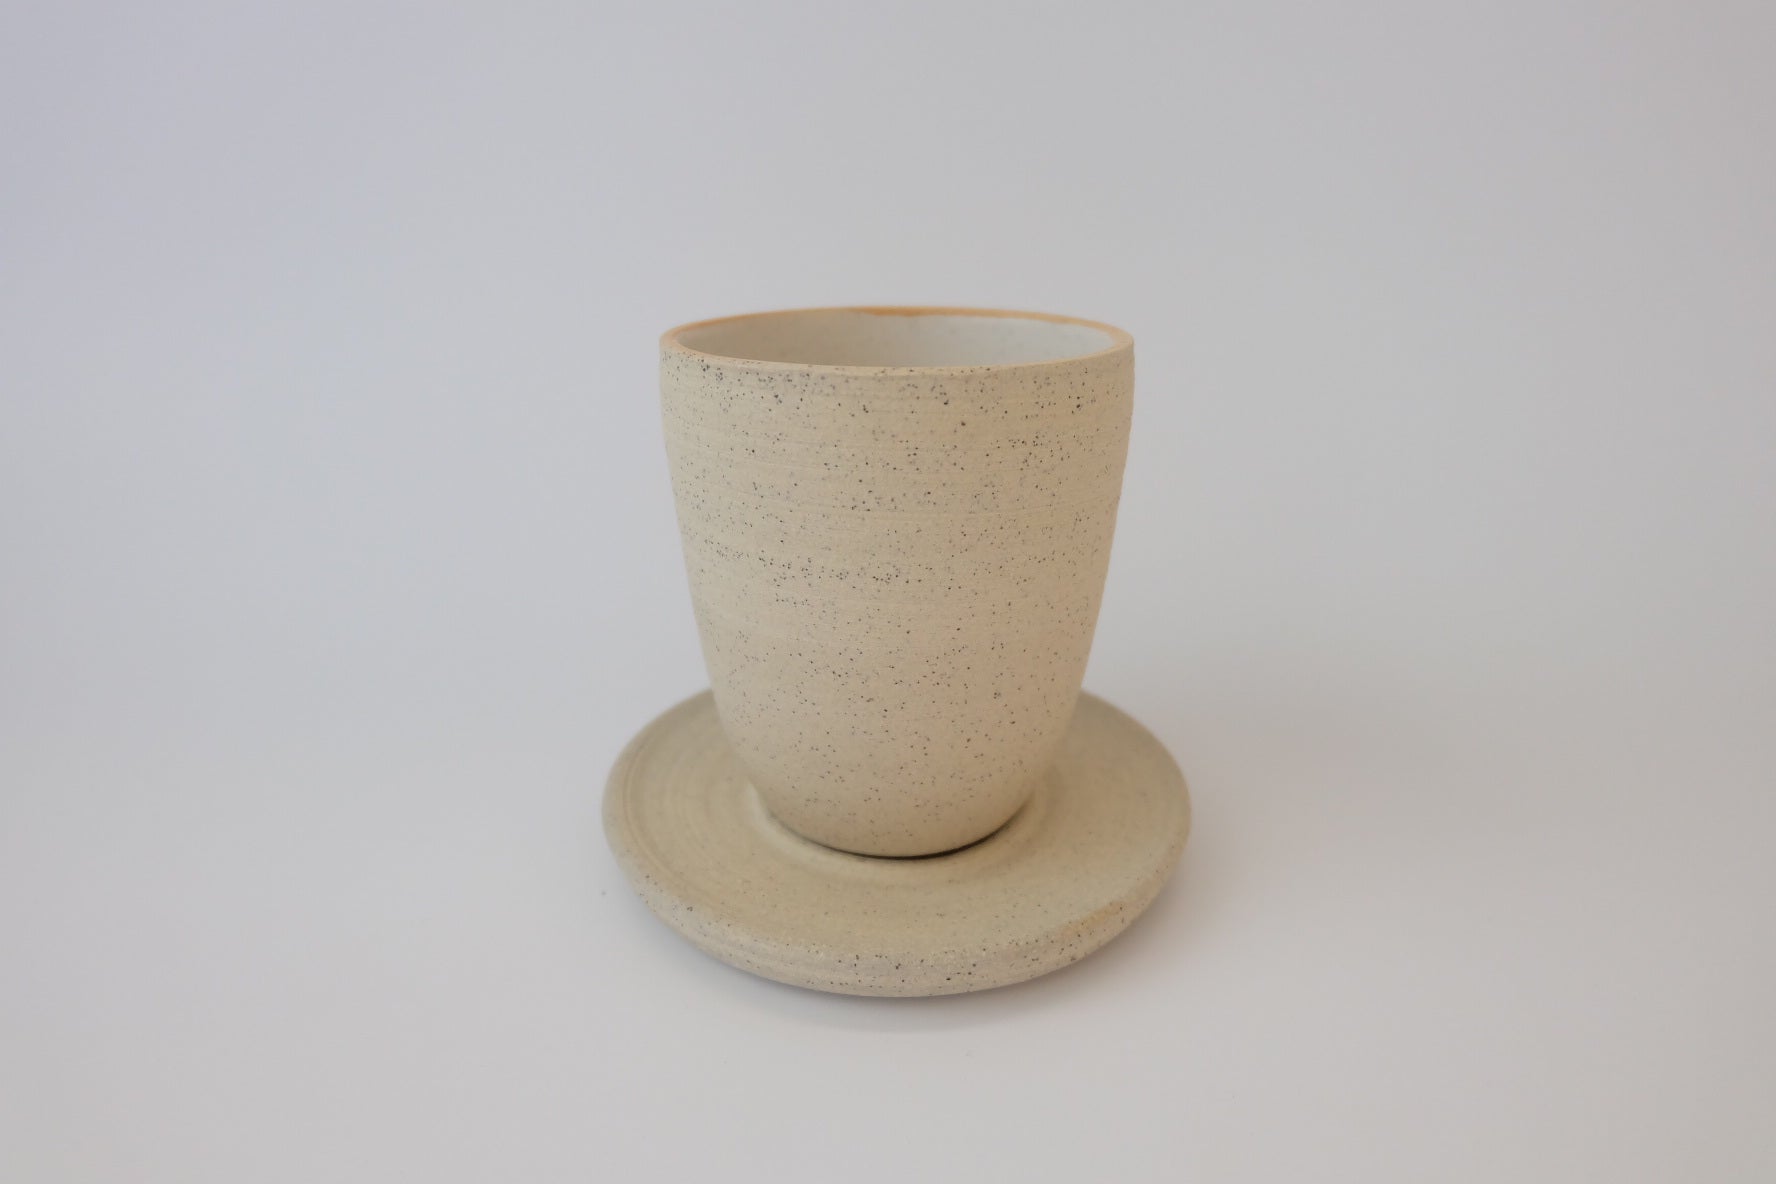 Raw Cup and Saucer